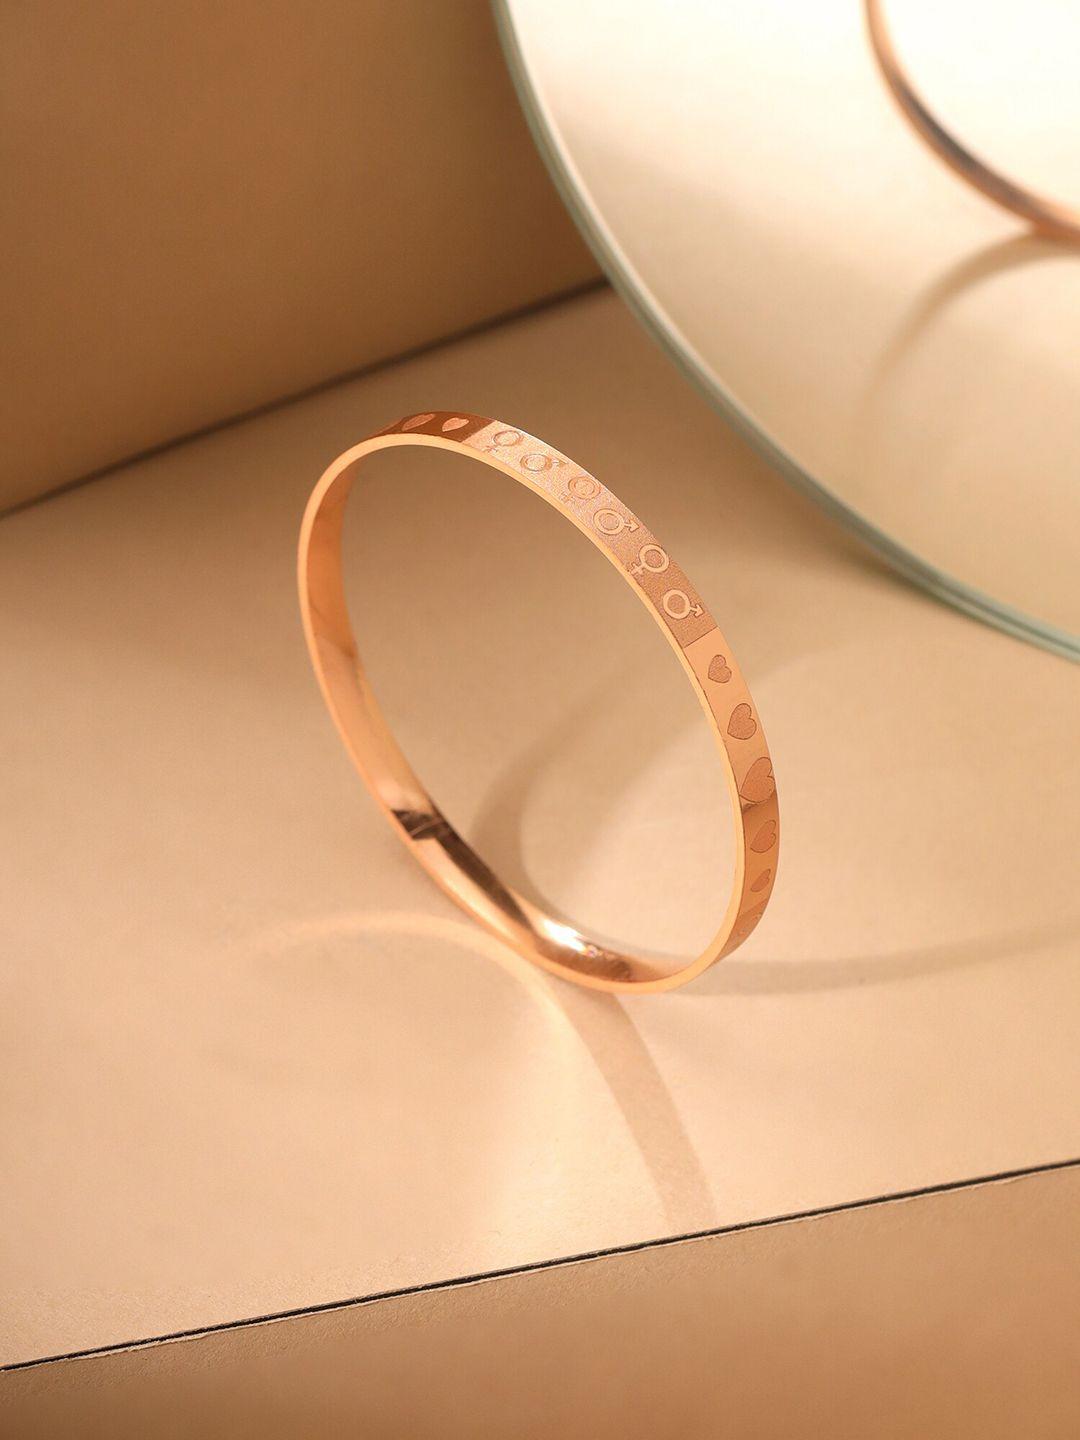 yellow chimes rose gold-plated heart designed bangle